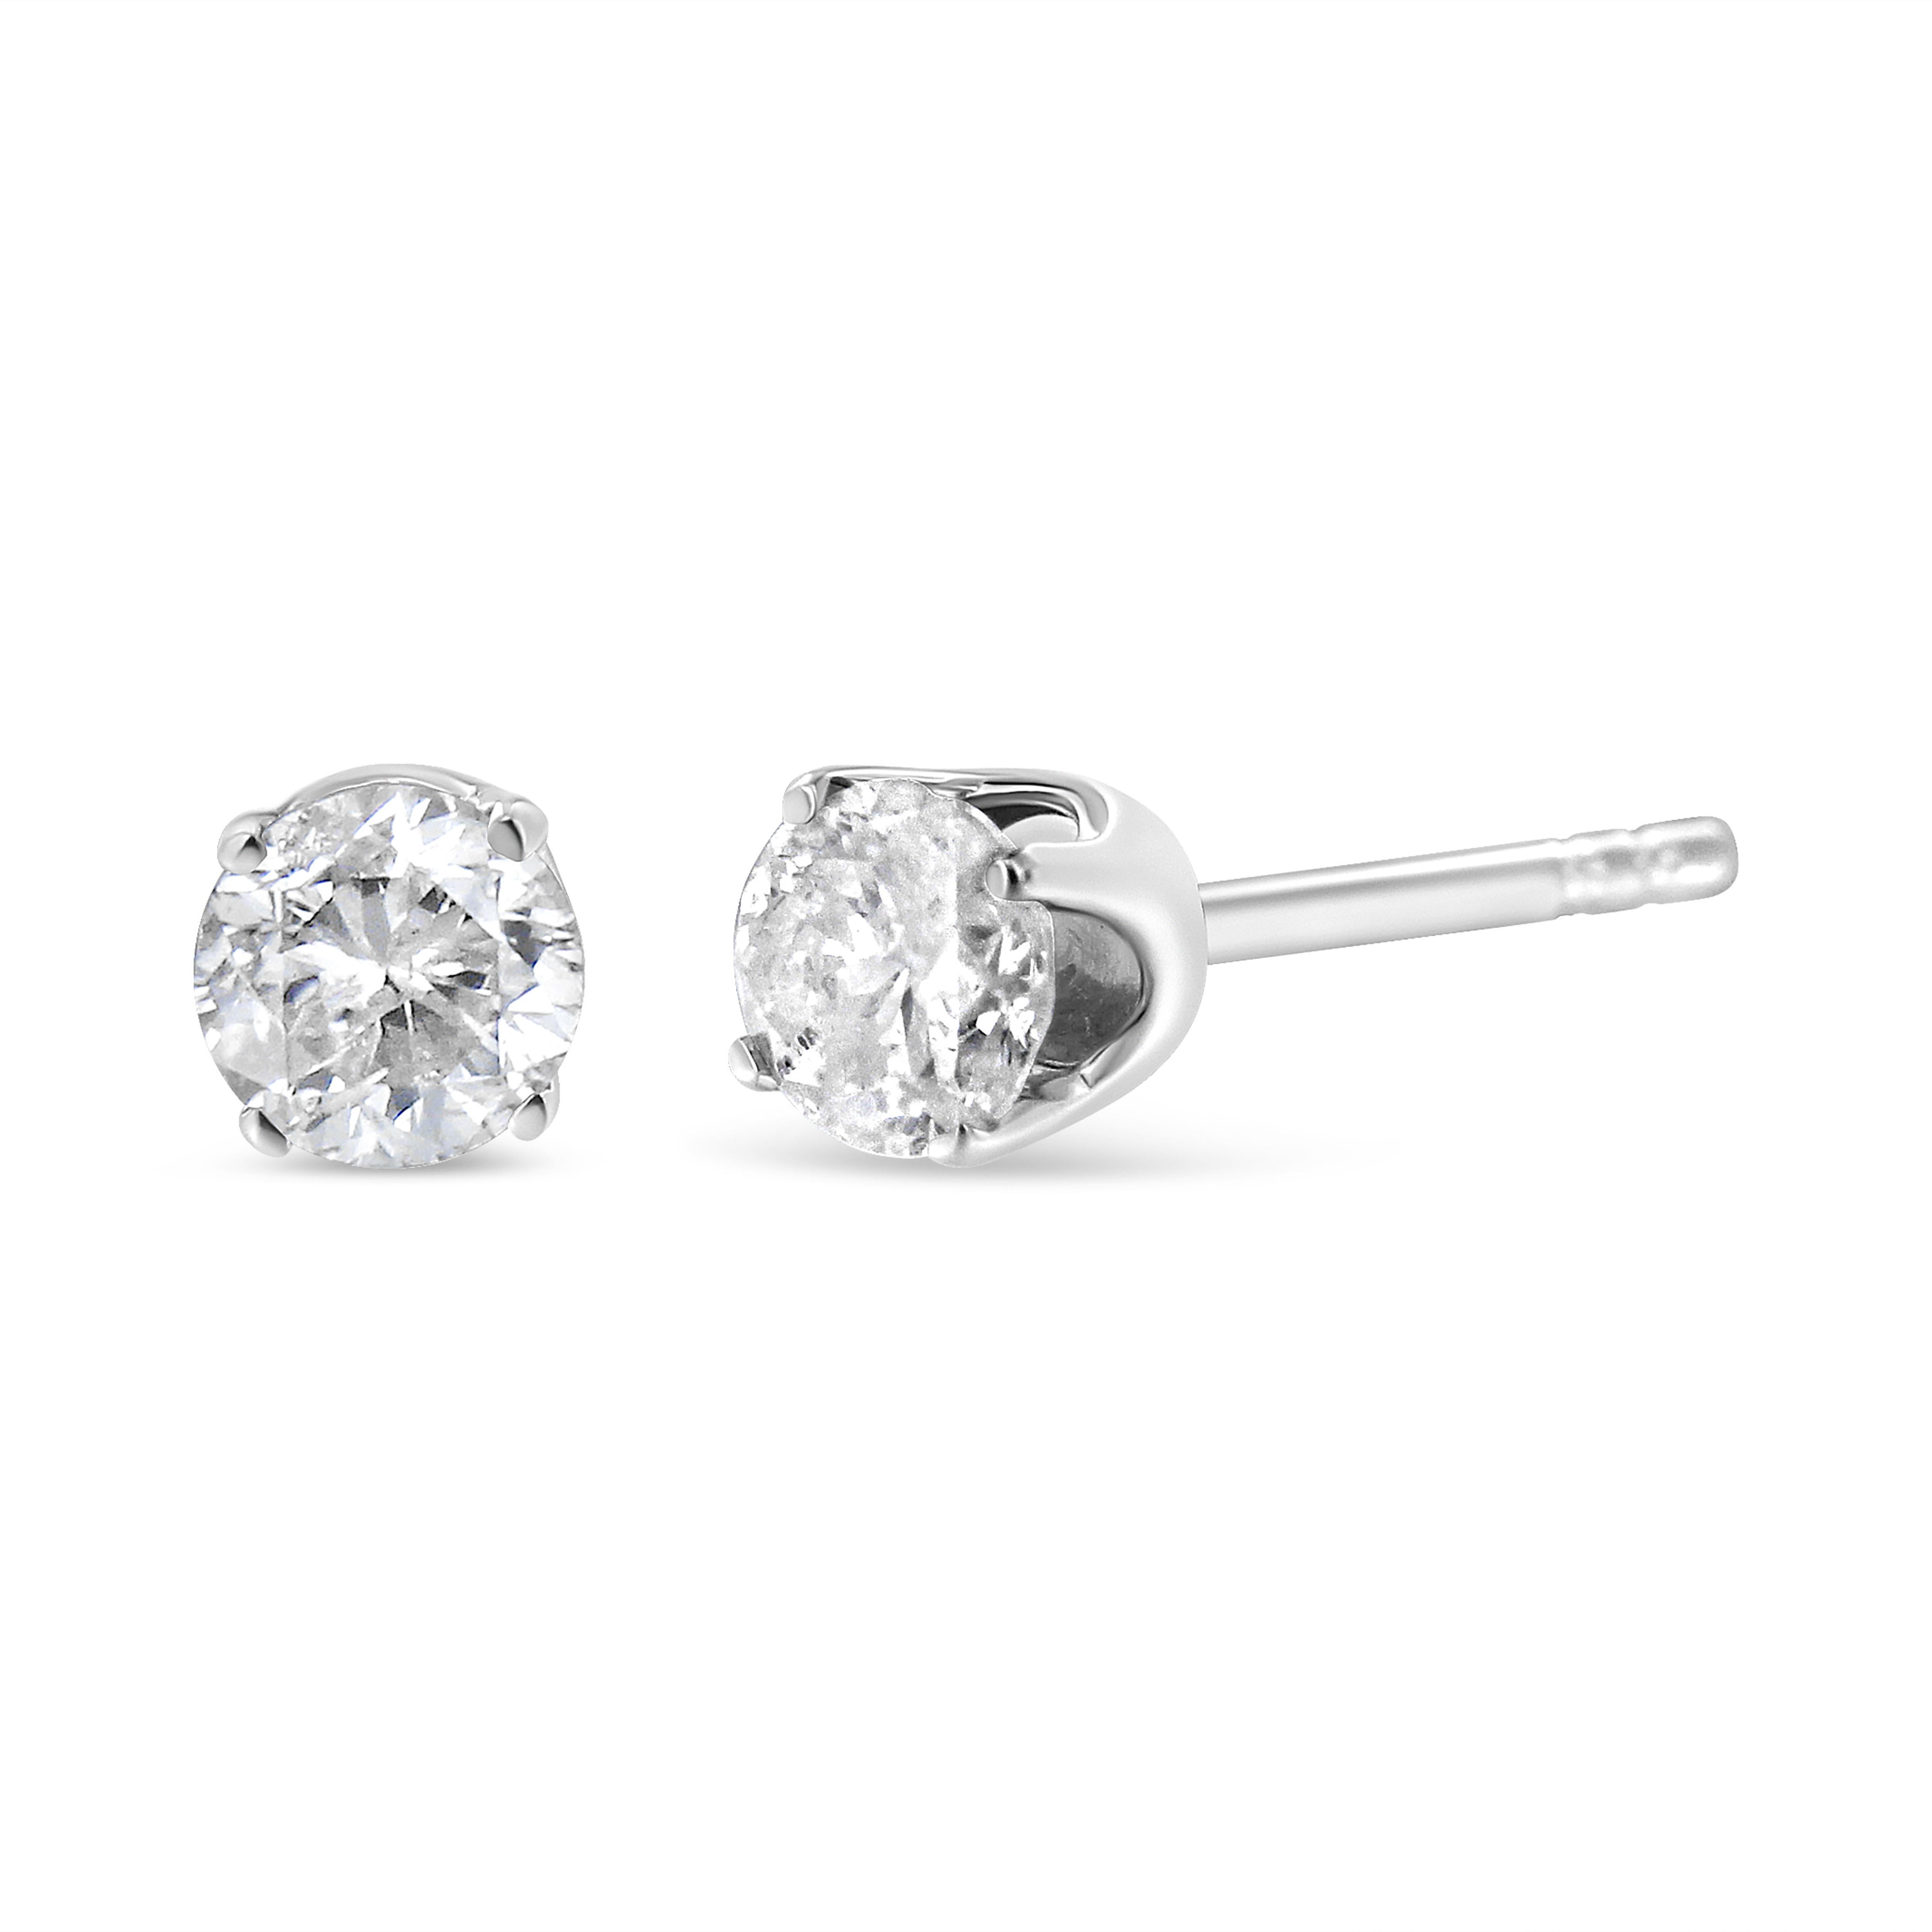 Two gorgeous white diamonds sit in a prong setting on these sparkling stud earrings. Crafted in 14k white gold, these diamond stud earrings feature a high polish finish. These stunning gold earrings feature 0.75 carats of diamonds, and the prong